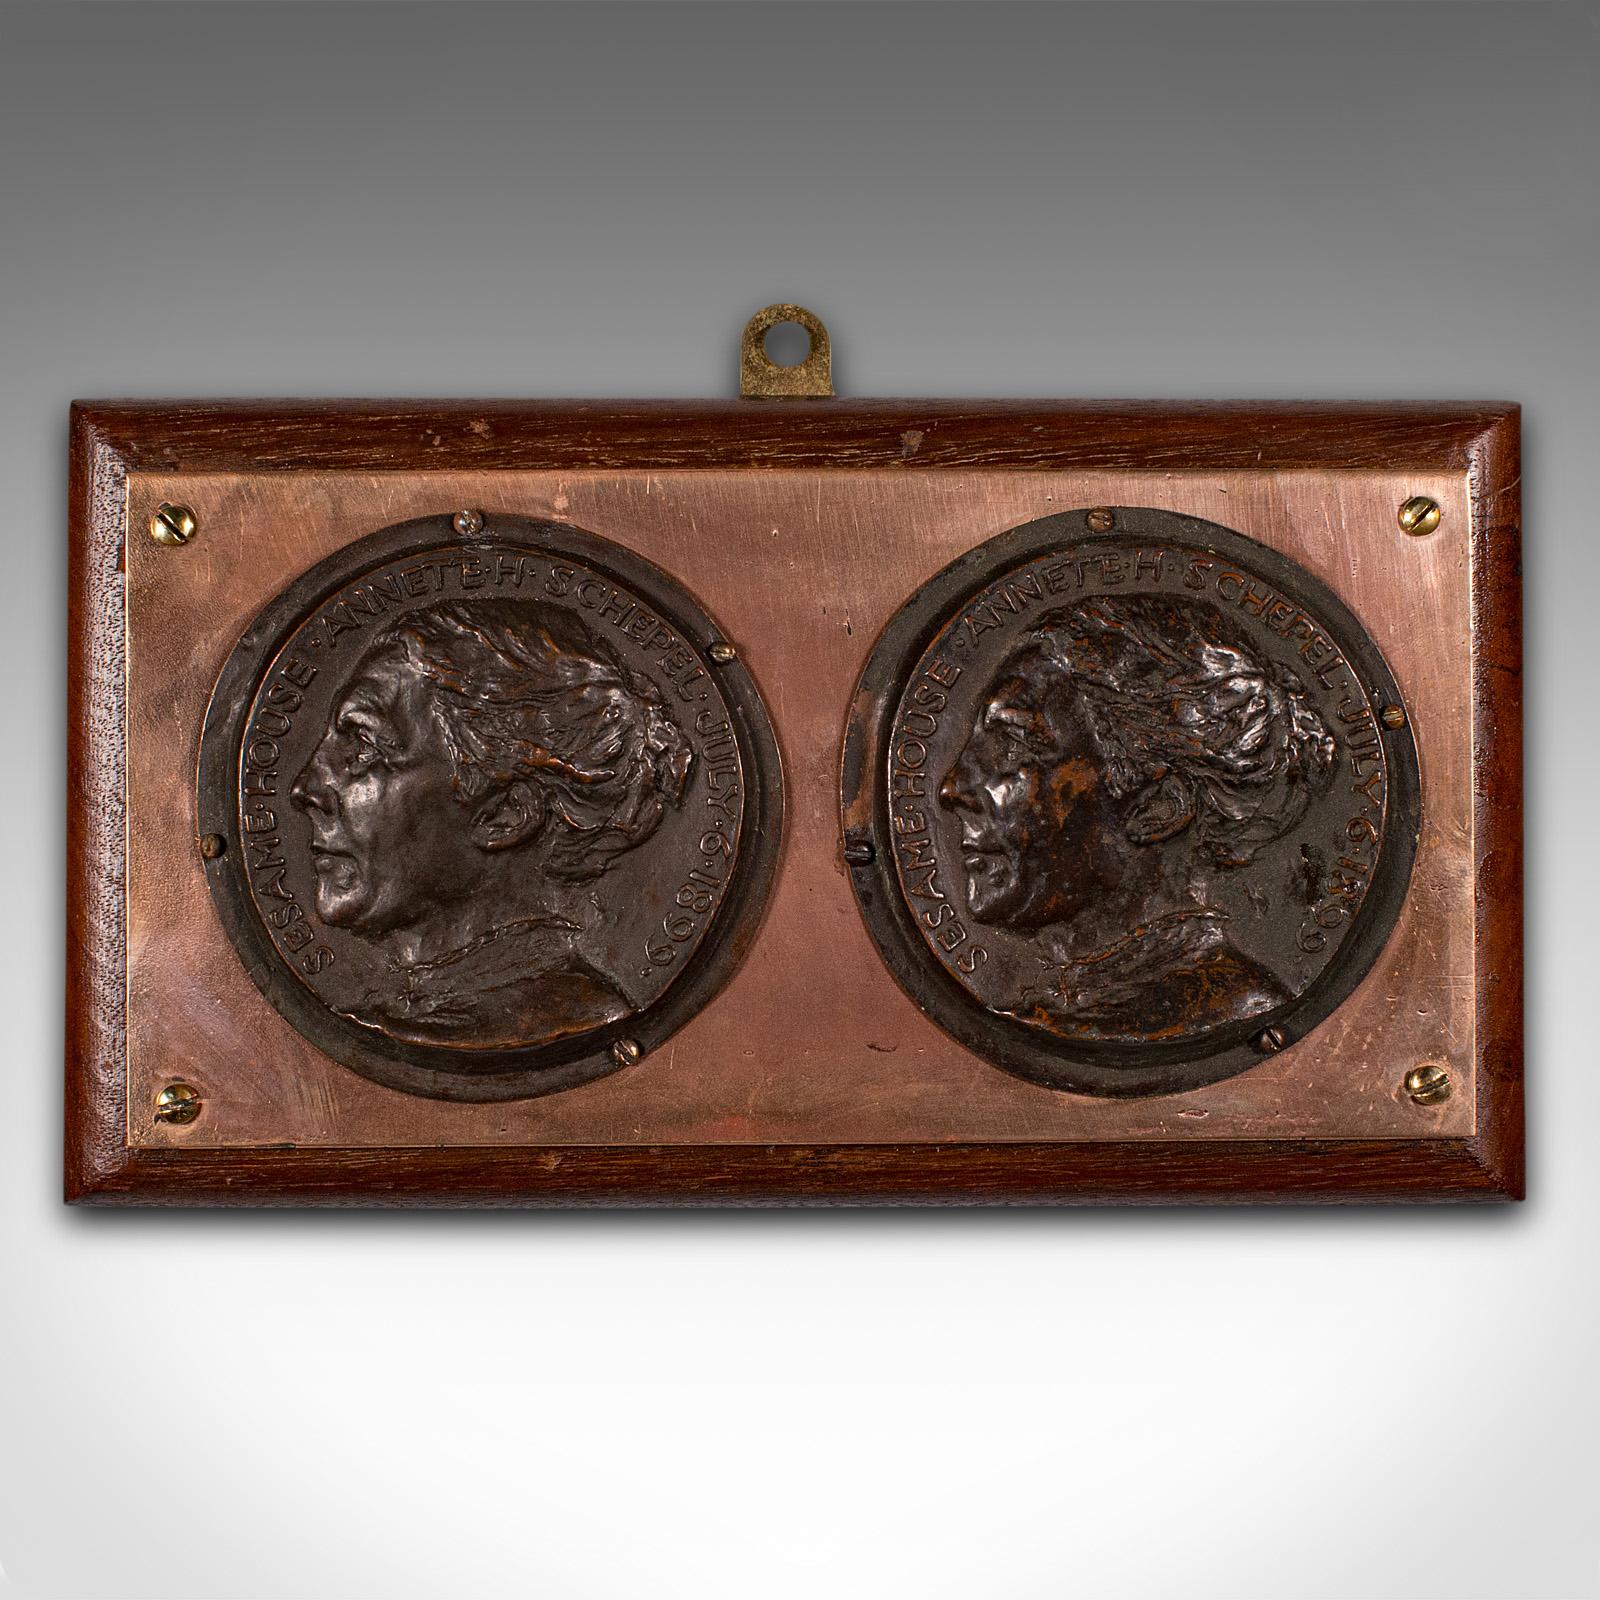 This is an antique mounted portrait plaque. An English, bronze and mahogany decorative wall panel, dating to the late Victorian period, circa 1900.

Sesame House was established in Hampstead, London in 1899 as a society to help aid the advancement